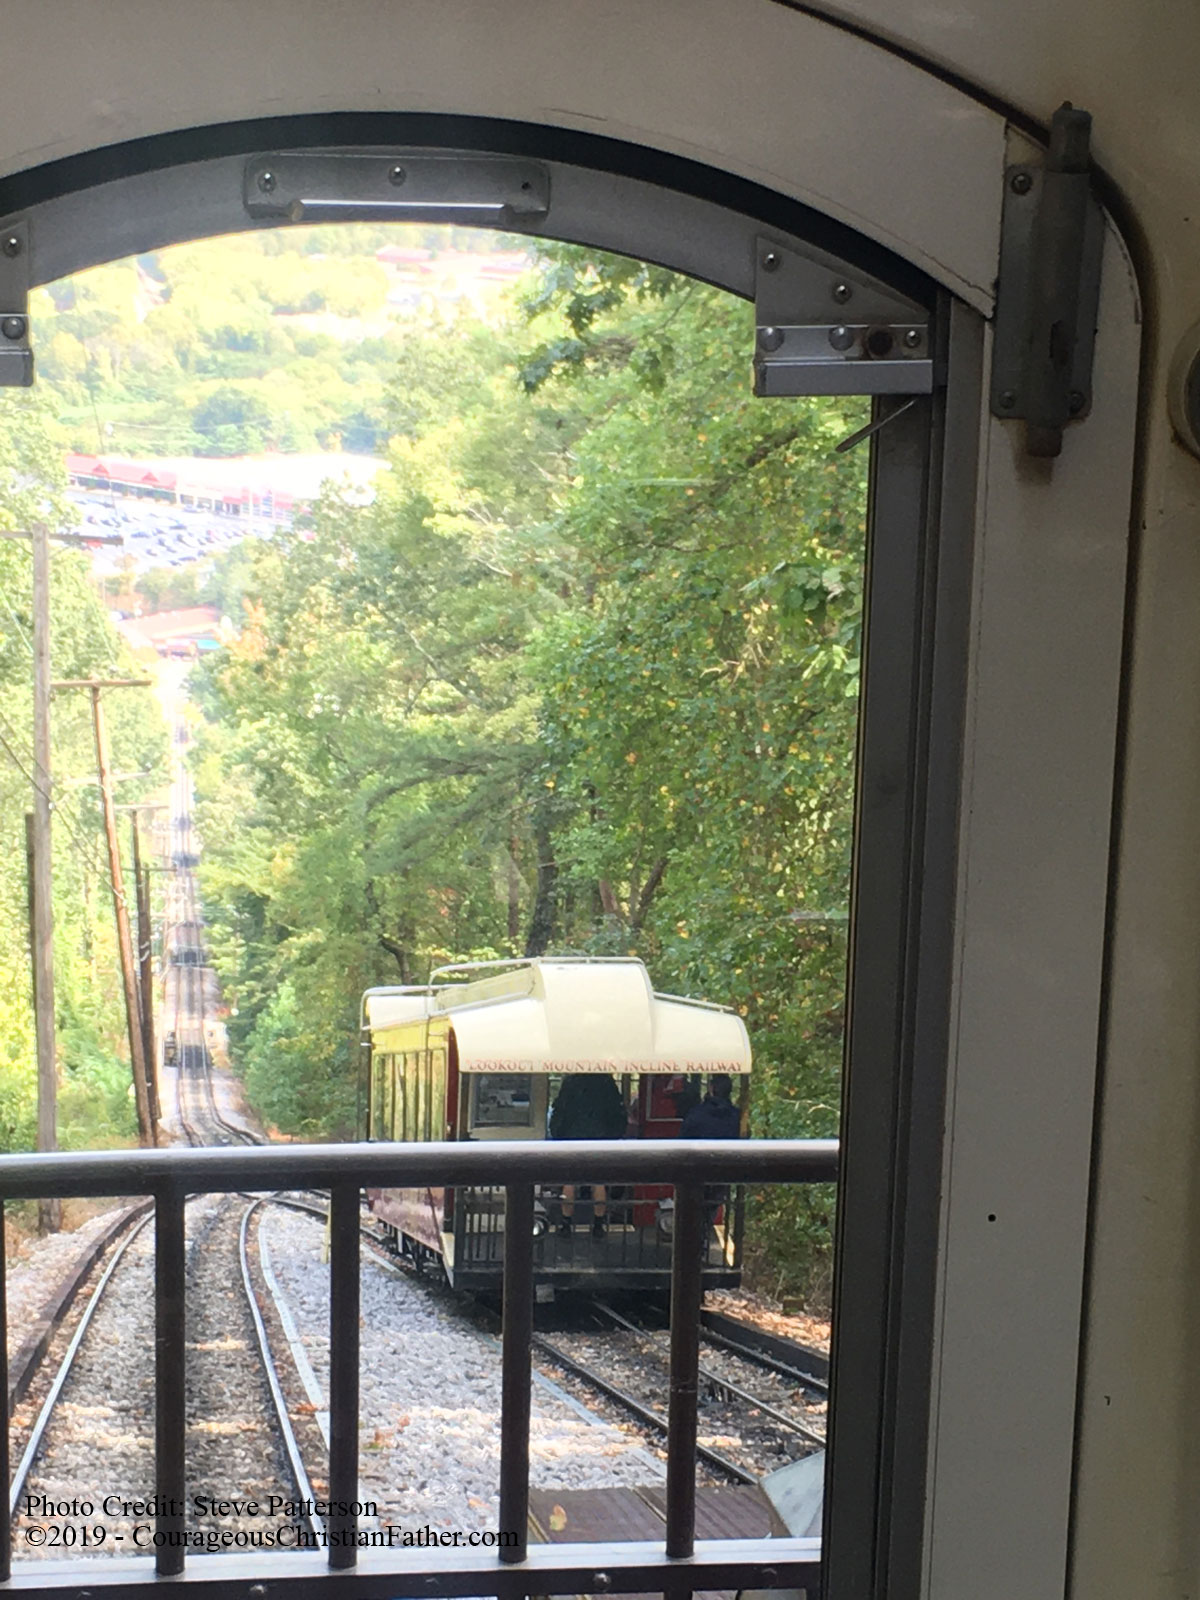 Lookout Mountain Incline Railway in Chattanooga, TN to go up and/or down the mountain to Lookout Mountain. Enjoy a ride on an angled rail car that will take you up or down Lookout Mountain. #InclineRailway #LookoutMountain